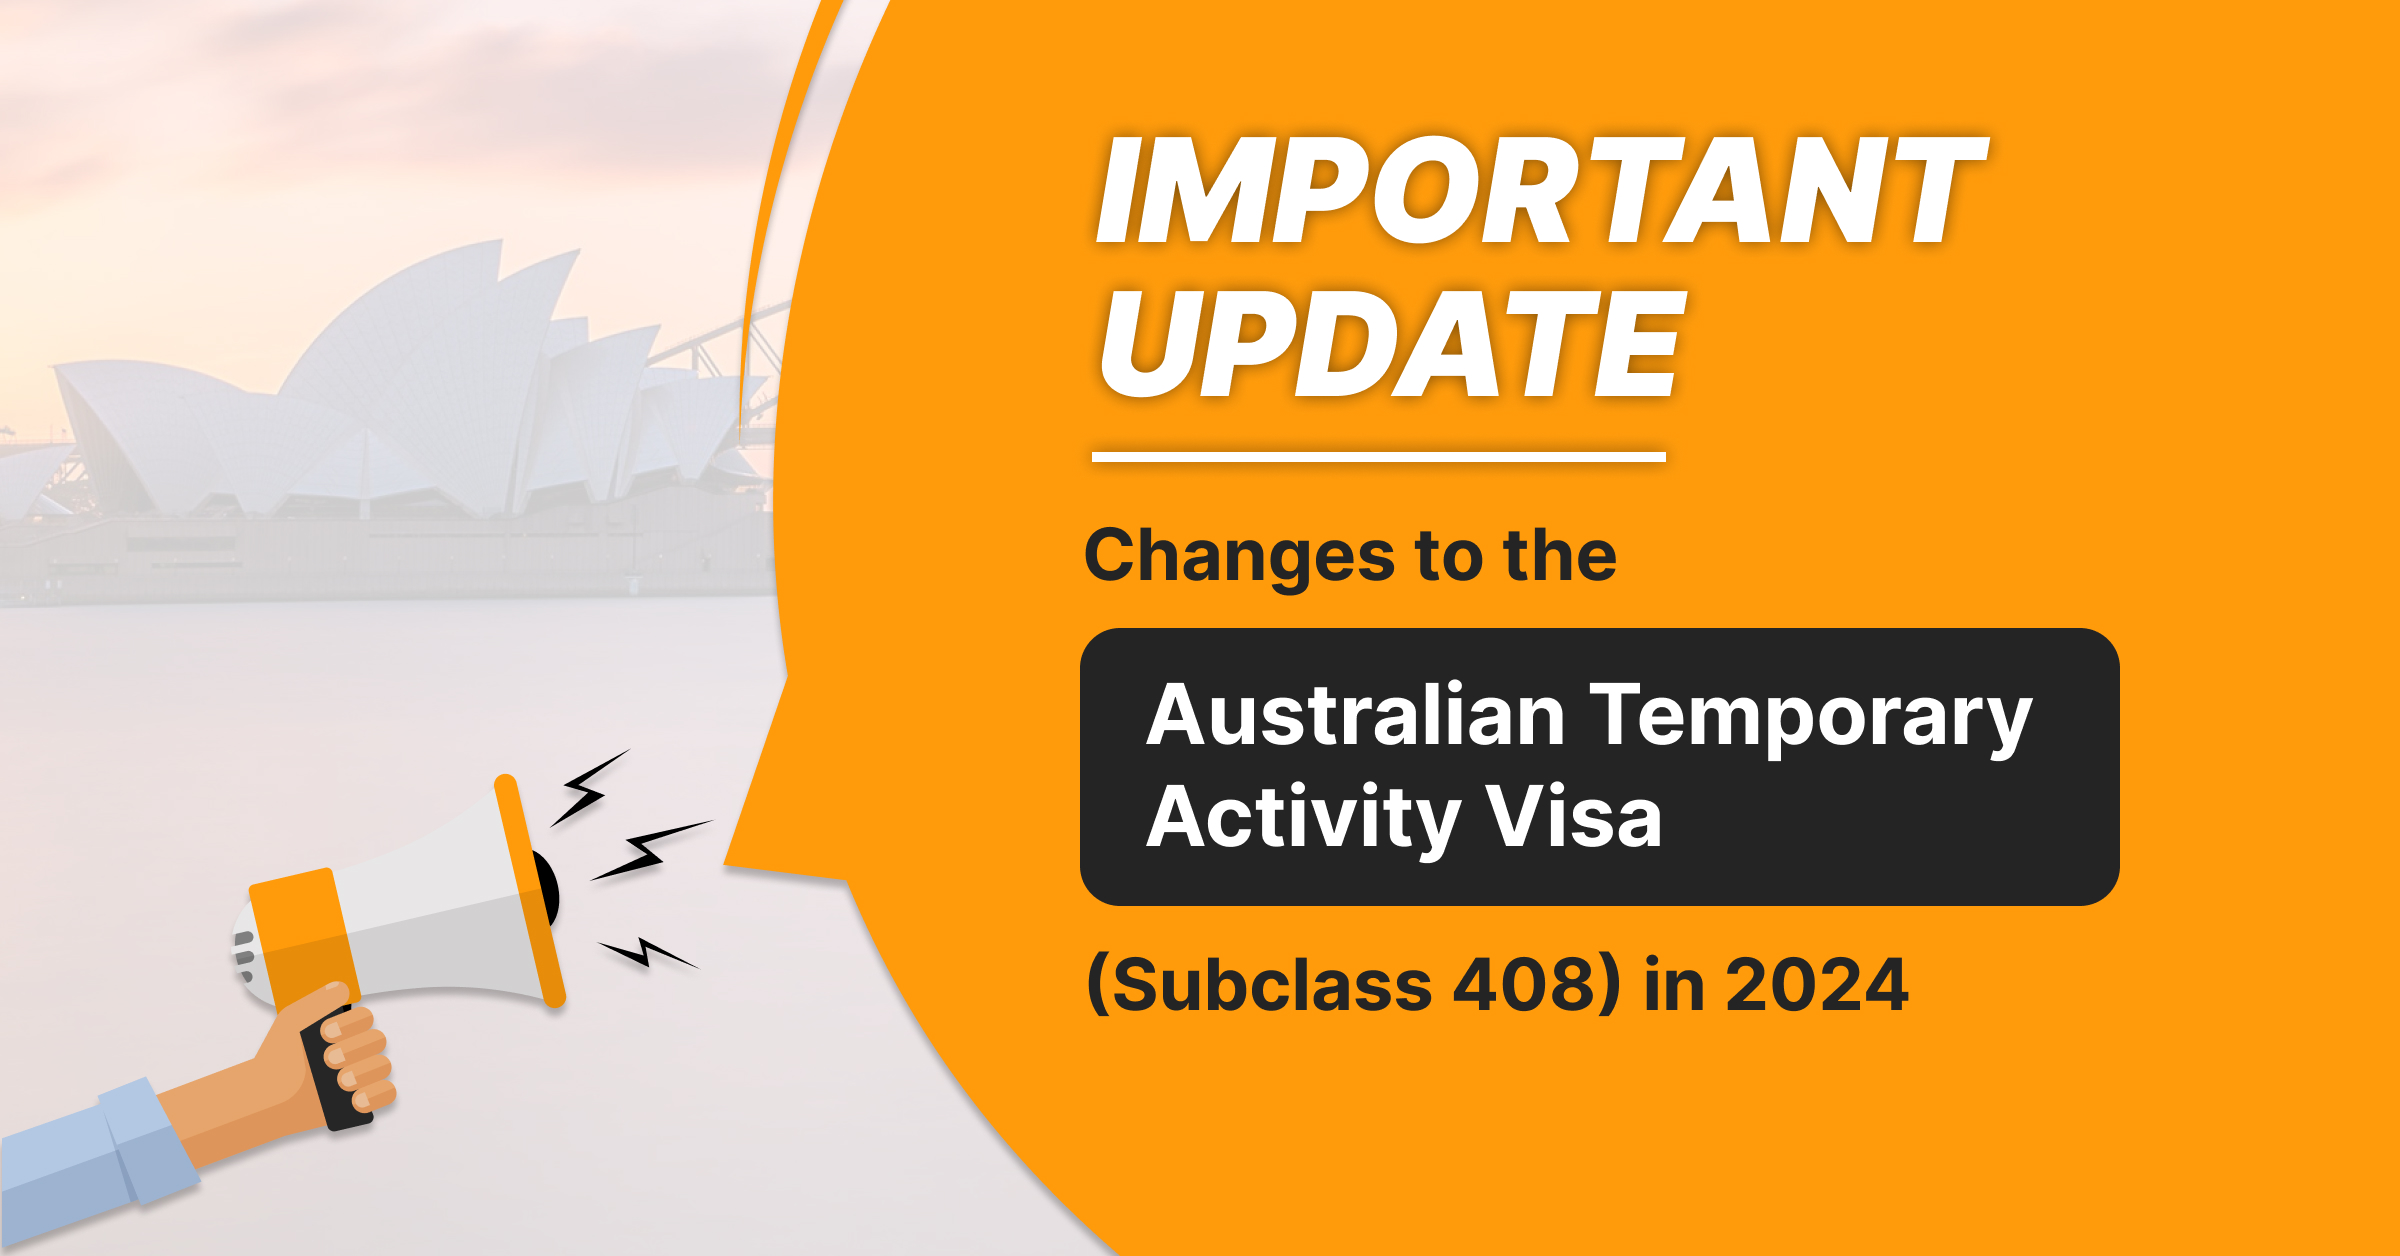 Important Update Changes to the Australian Temporary Activity Visa (Subclass 408) in 2024 image